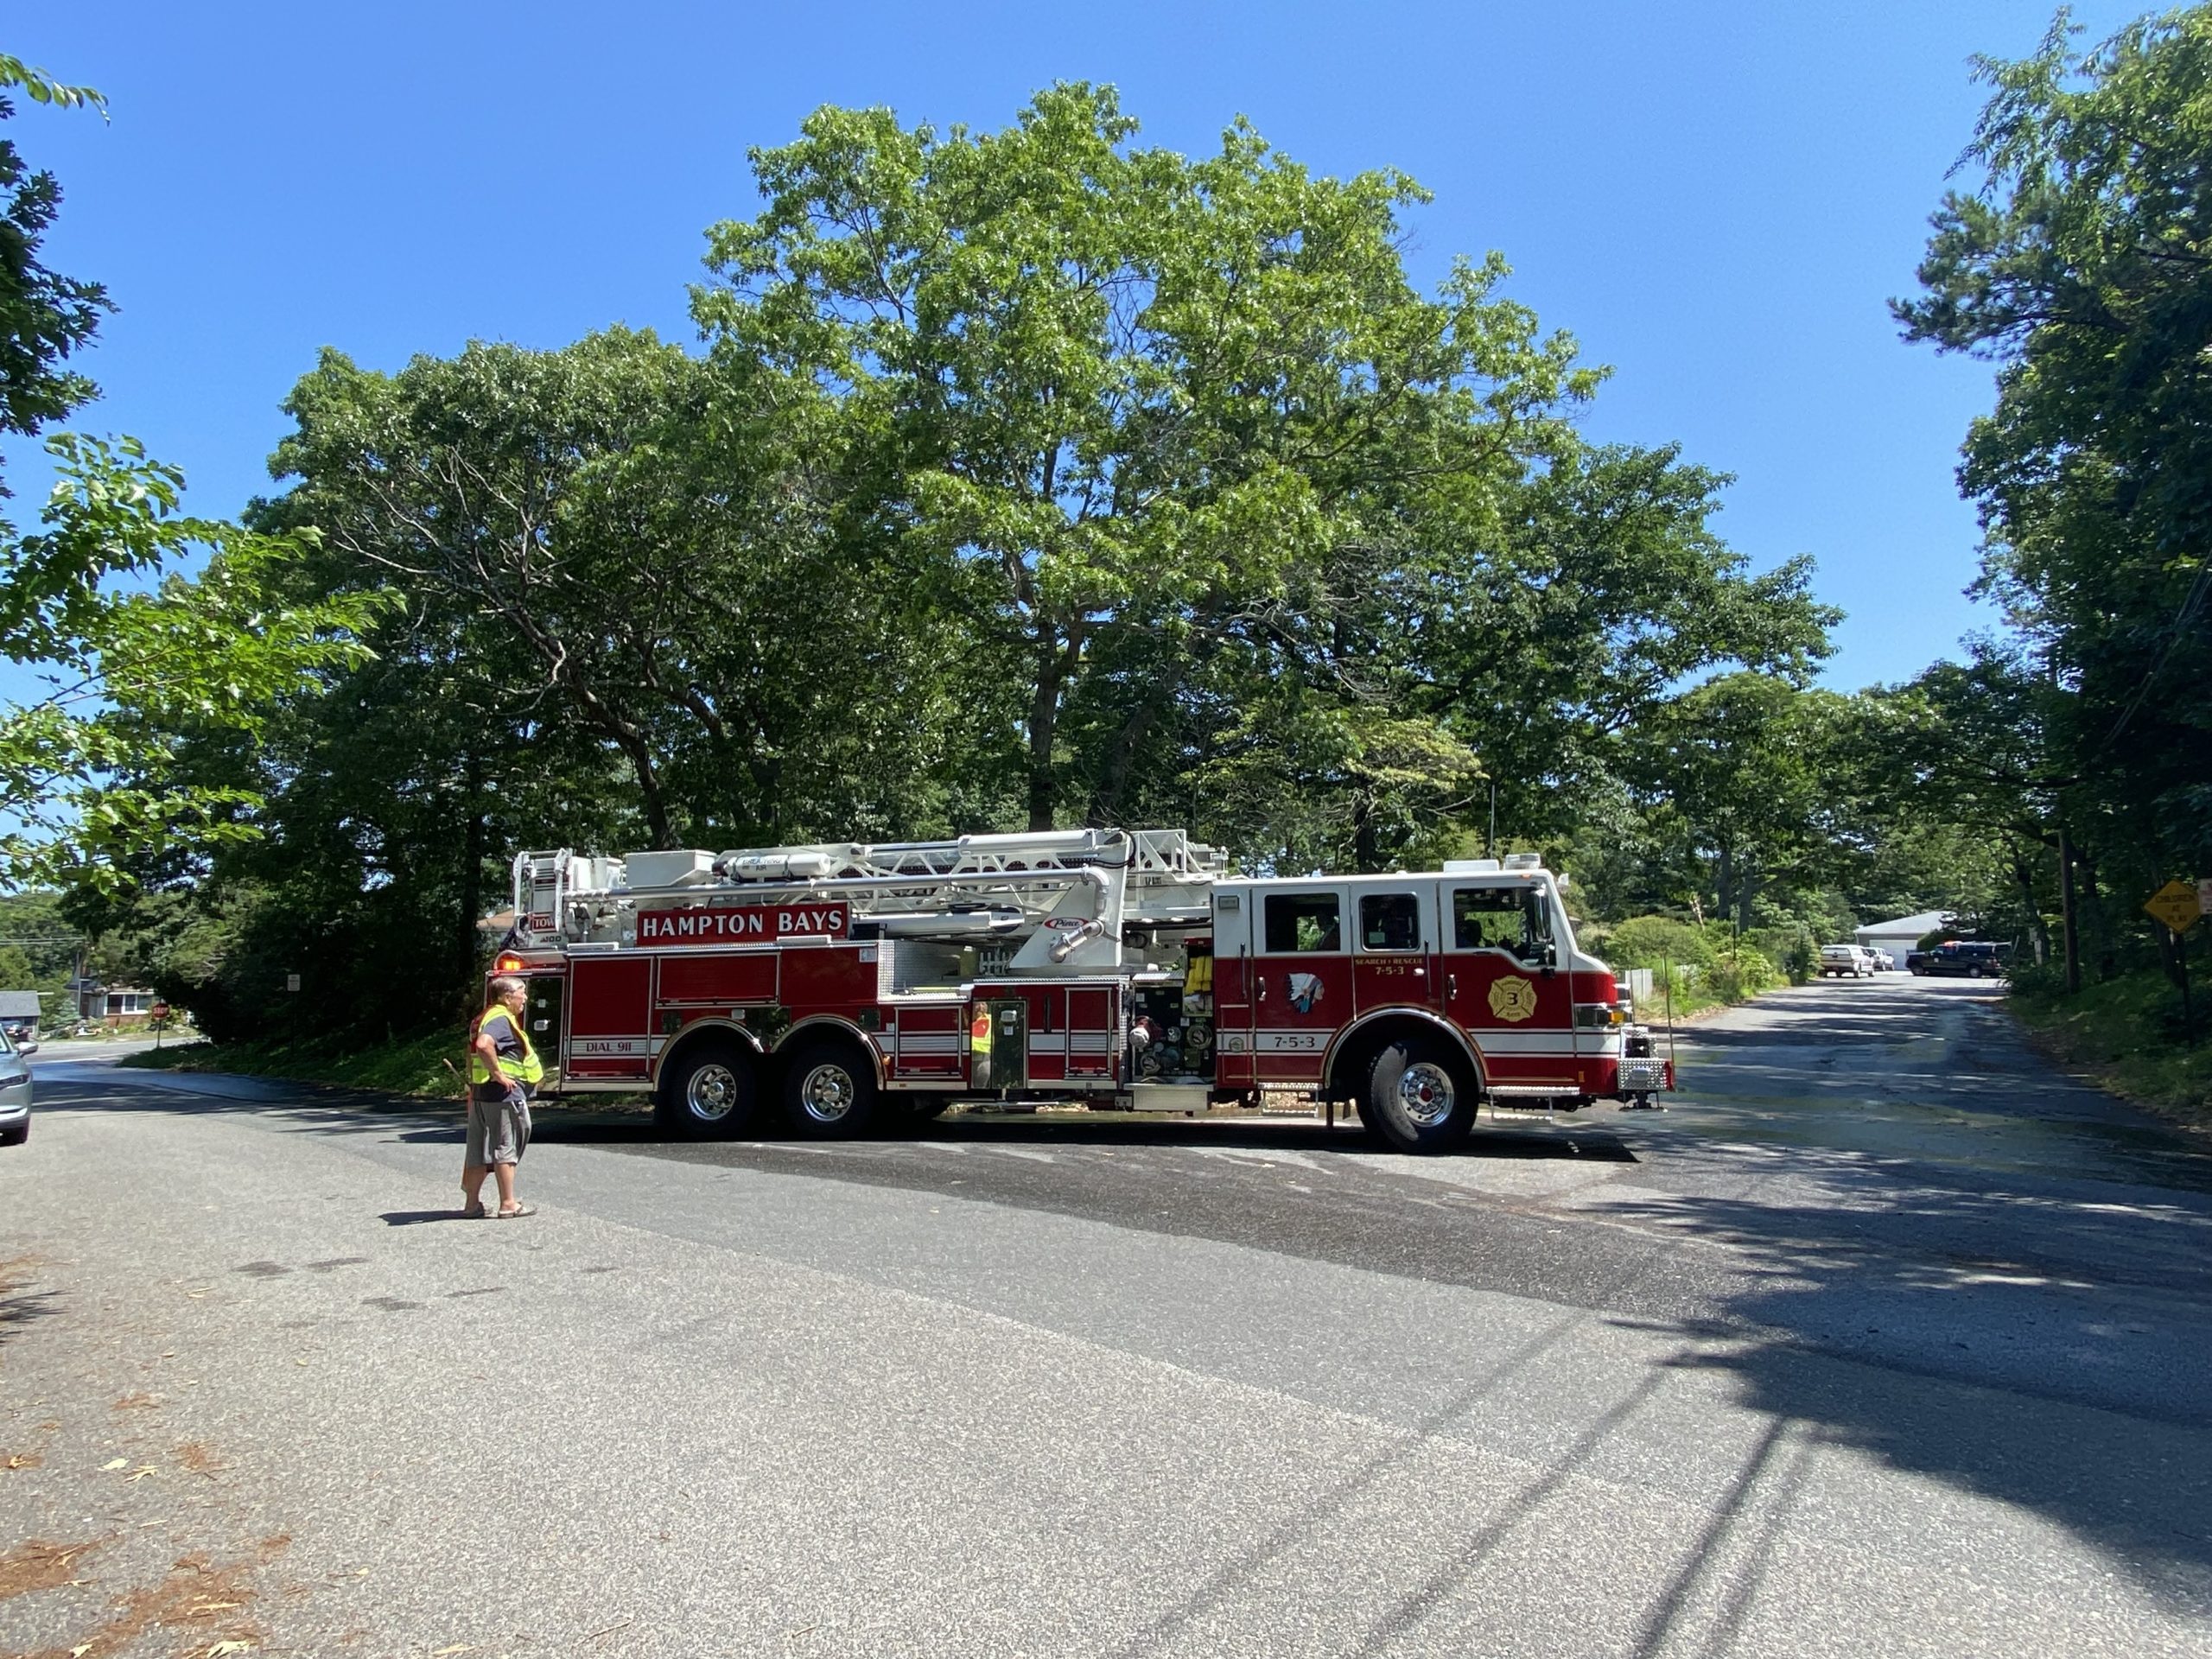 Firefighters battled a blaze on Mildred Place in Hampton Bays Wednesday morning, June 30. DANA SHAW PHOTOS